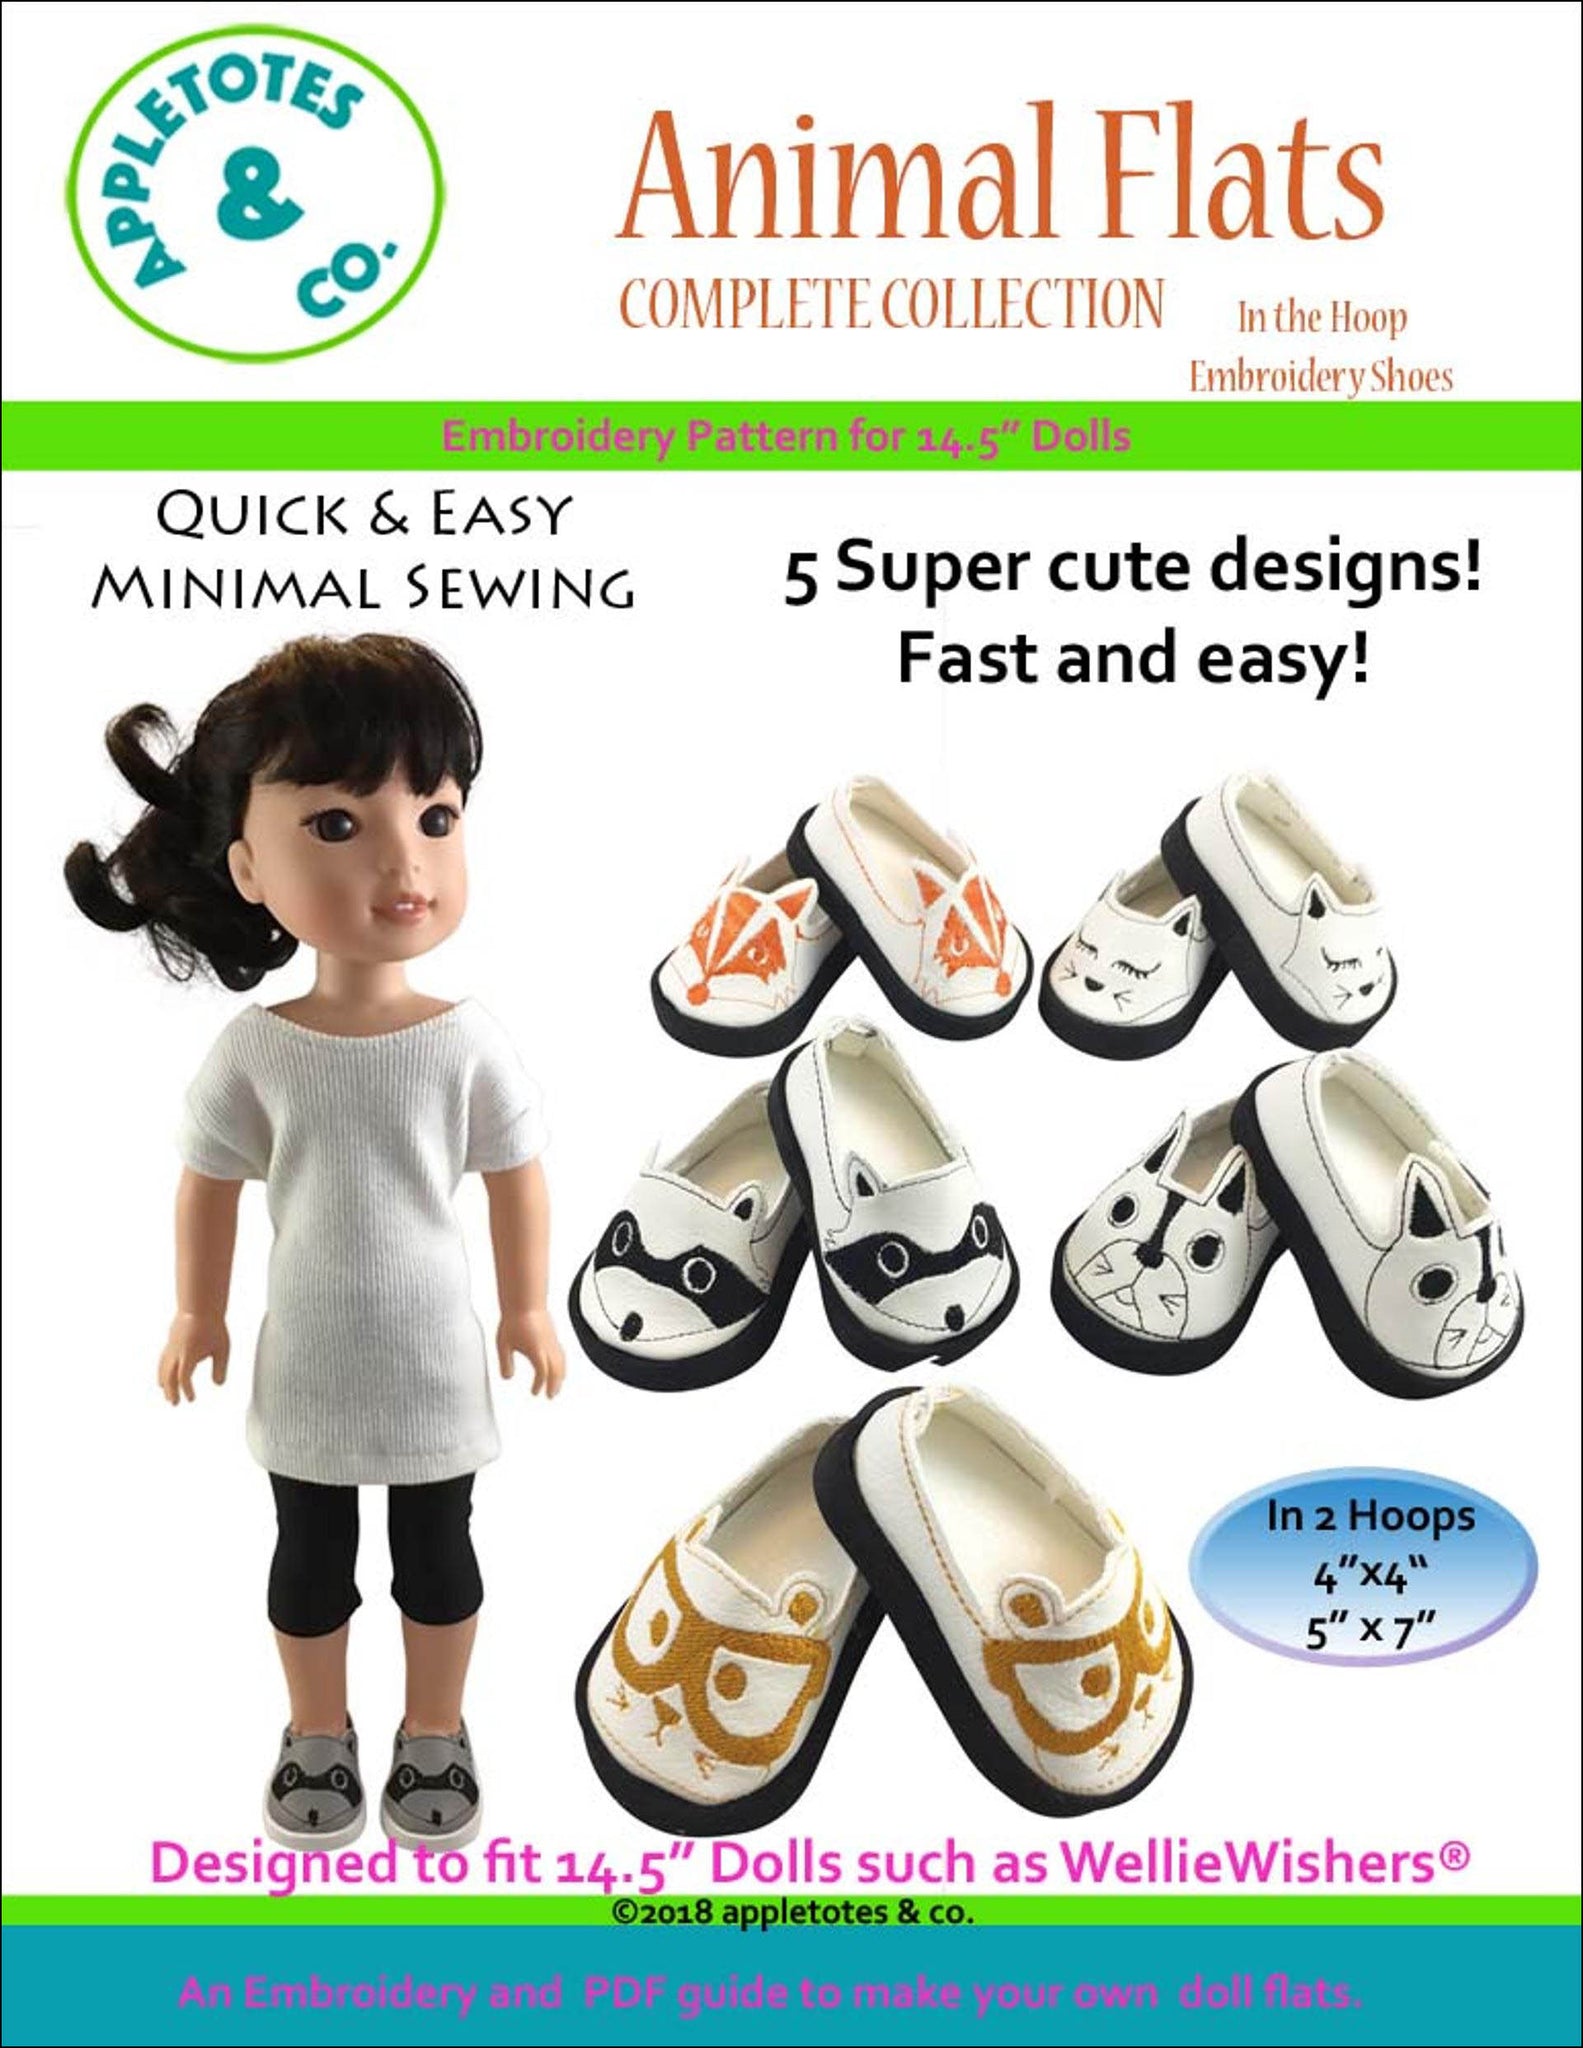 Animal Flats Collection ITH Embroidery Patterns for 14.5" Dolls